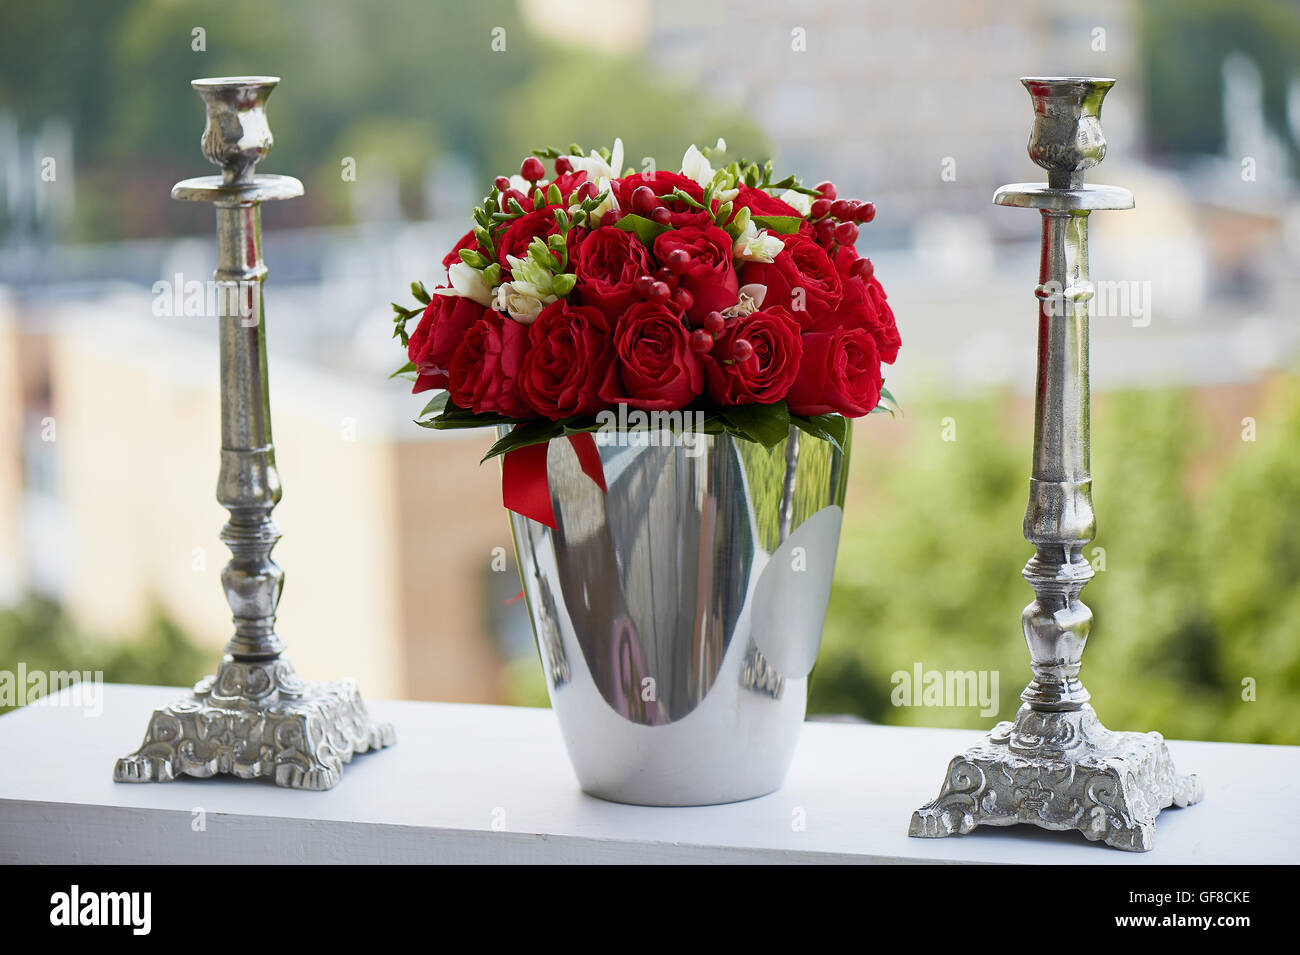 dense red bouquet of roses and berries, brilliant in the iron bucket and two metal candle holders Stock Photo